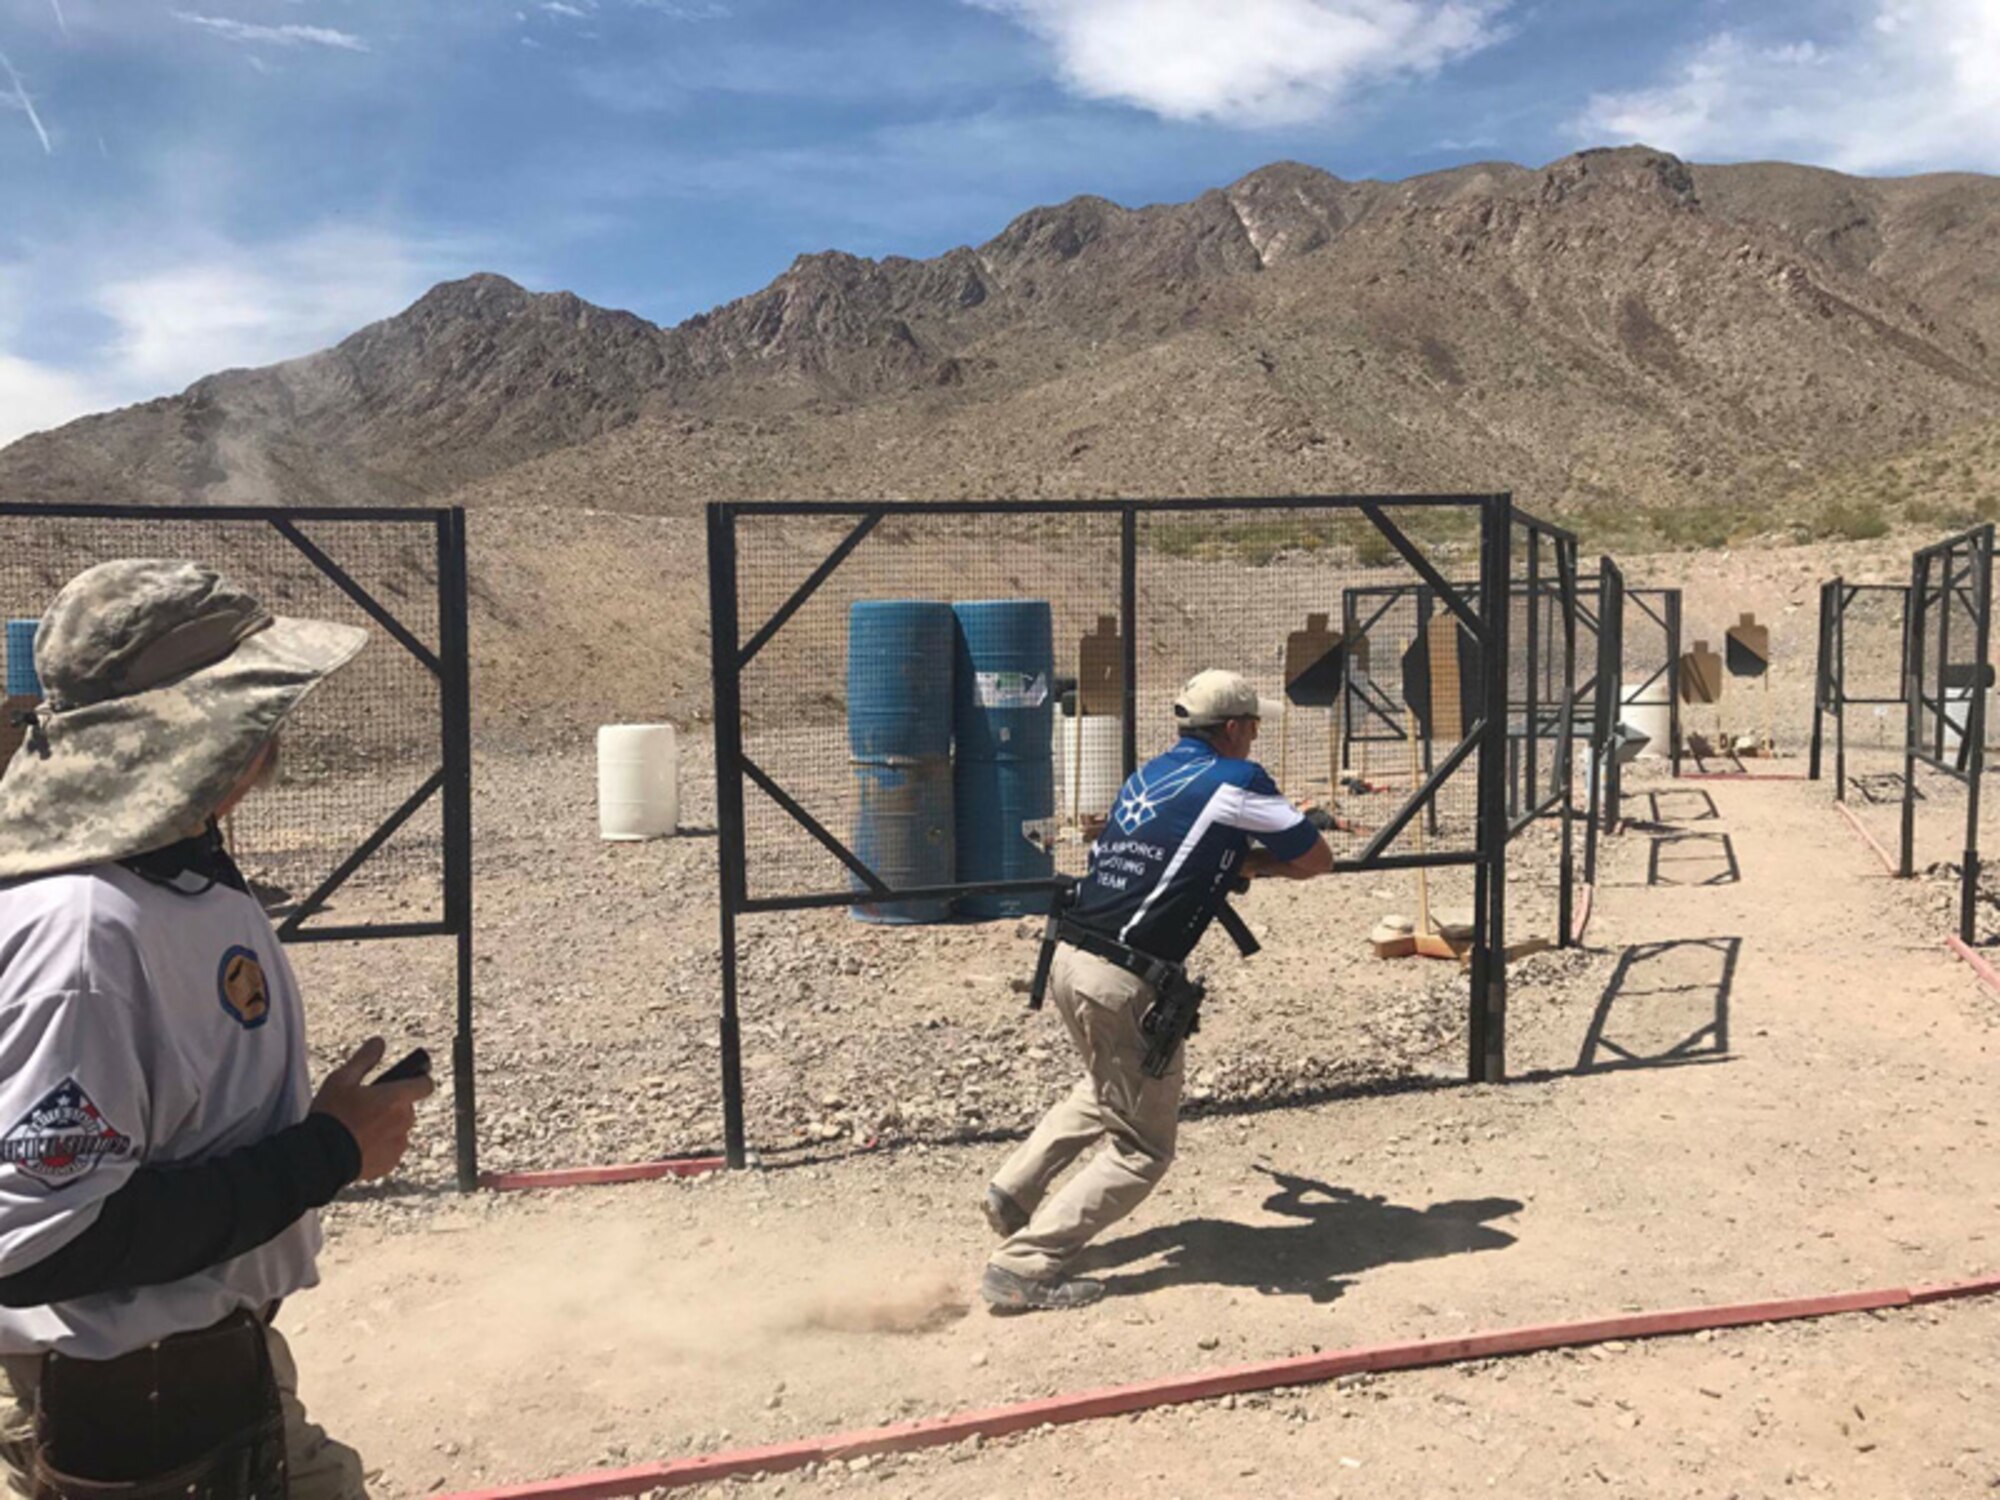 Tech Sgt. Eric Crotsley of the 552nd Maintenance Squadron at Tinker Air Force Base, Oklahoma, competes in the open division of the Multi-Gun Nationals on April 12-17 in Boulder City, Nevada. 